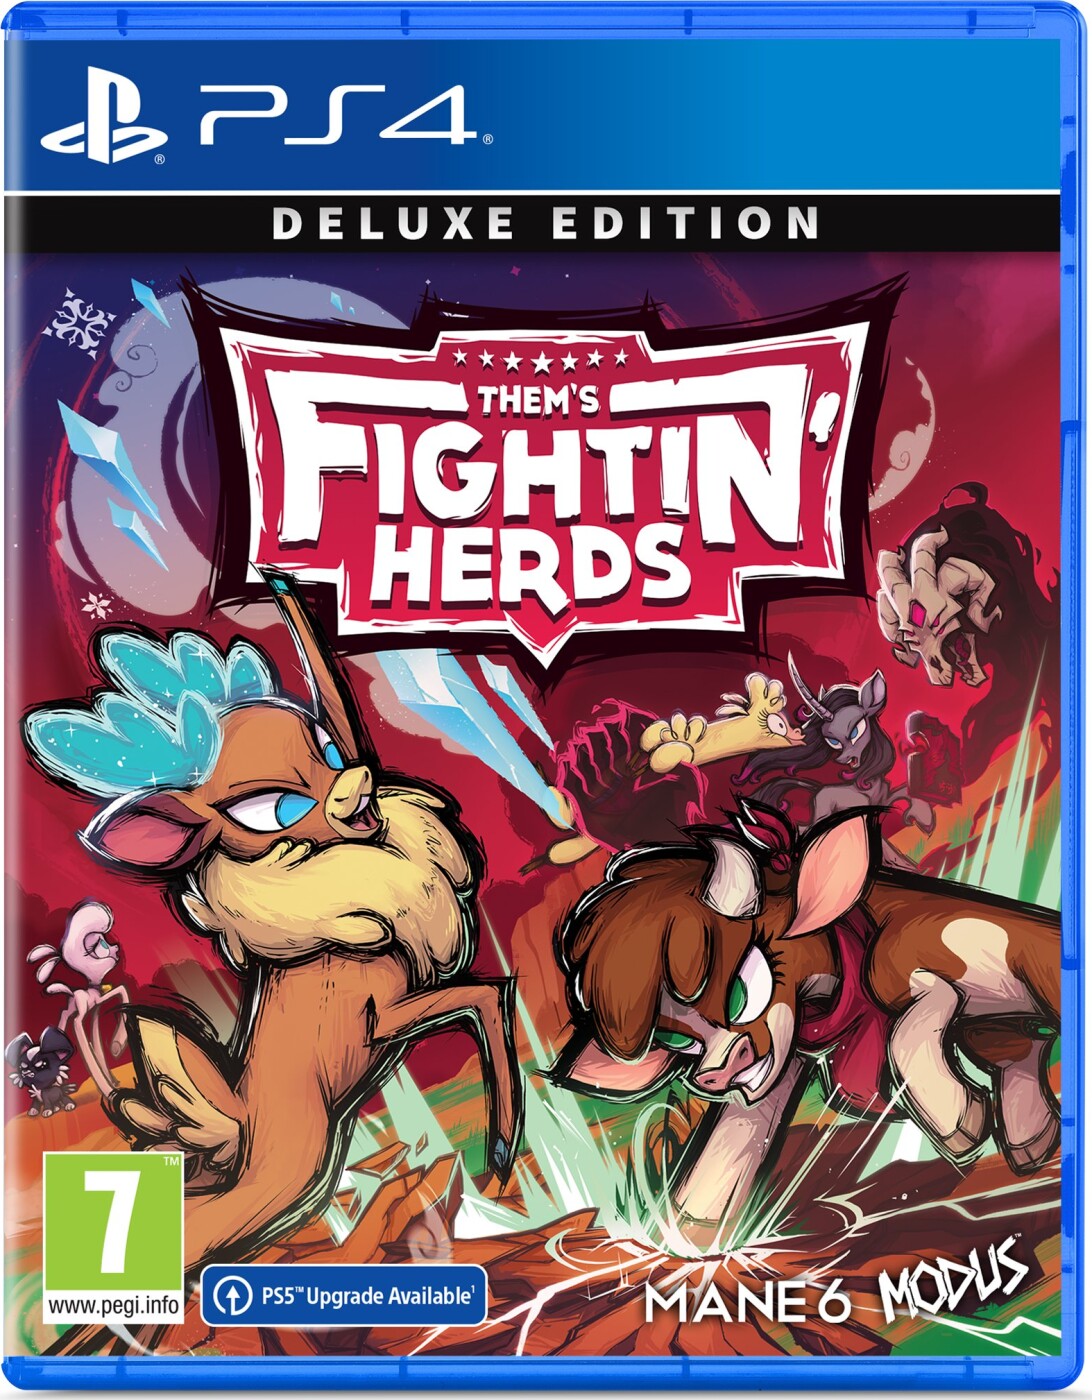 Them's Fightin' Herds (deluxe Edition) - PS4